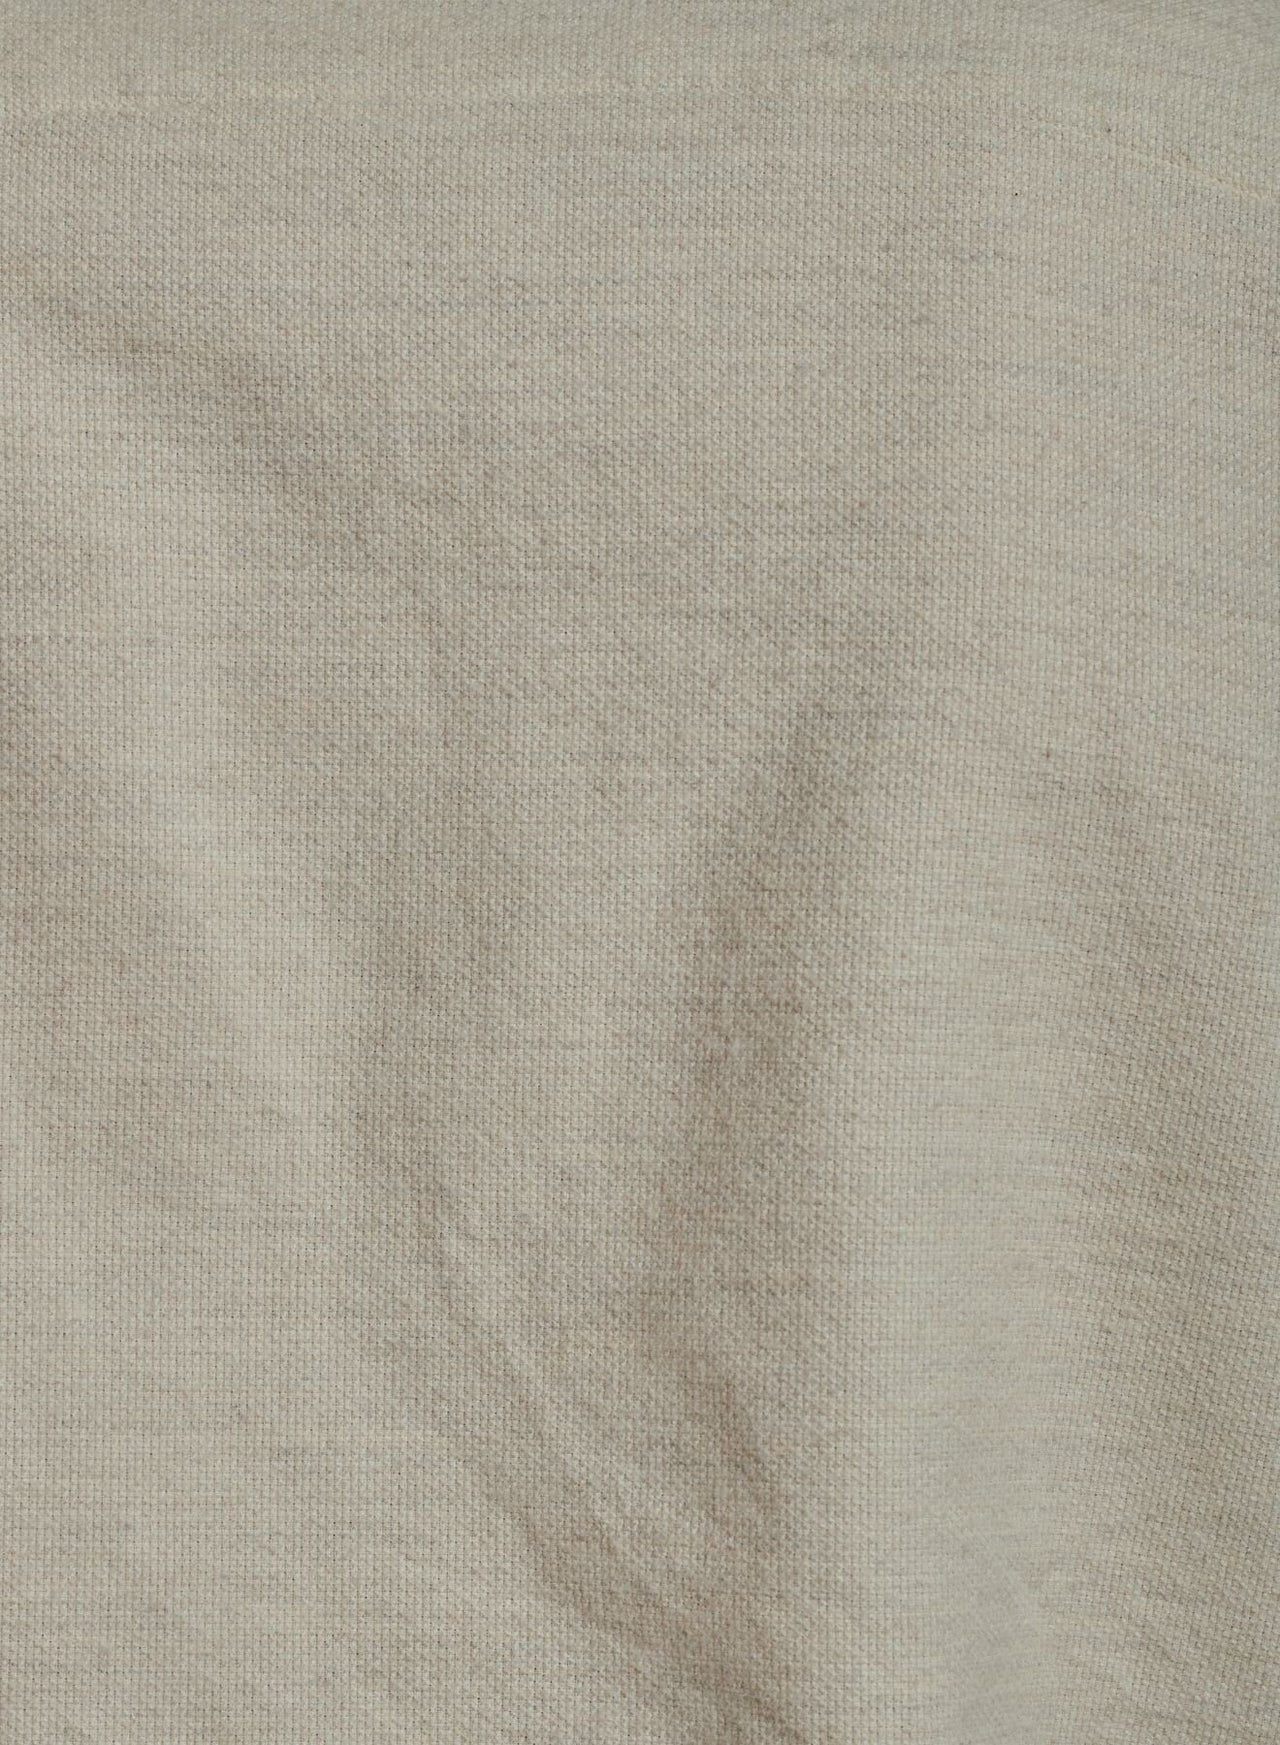 Feel Good Shirt in the Softest Cream White Double Brushed Italian Cotton Flannel